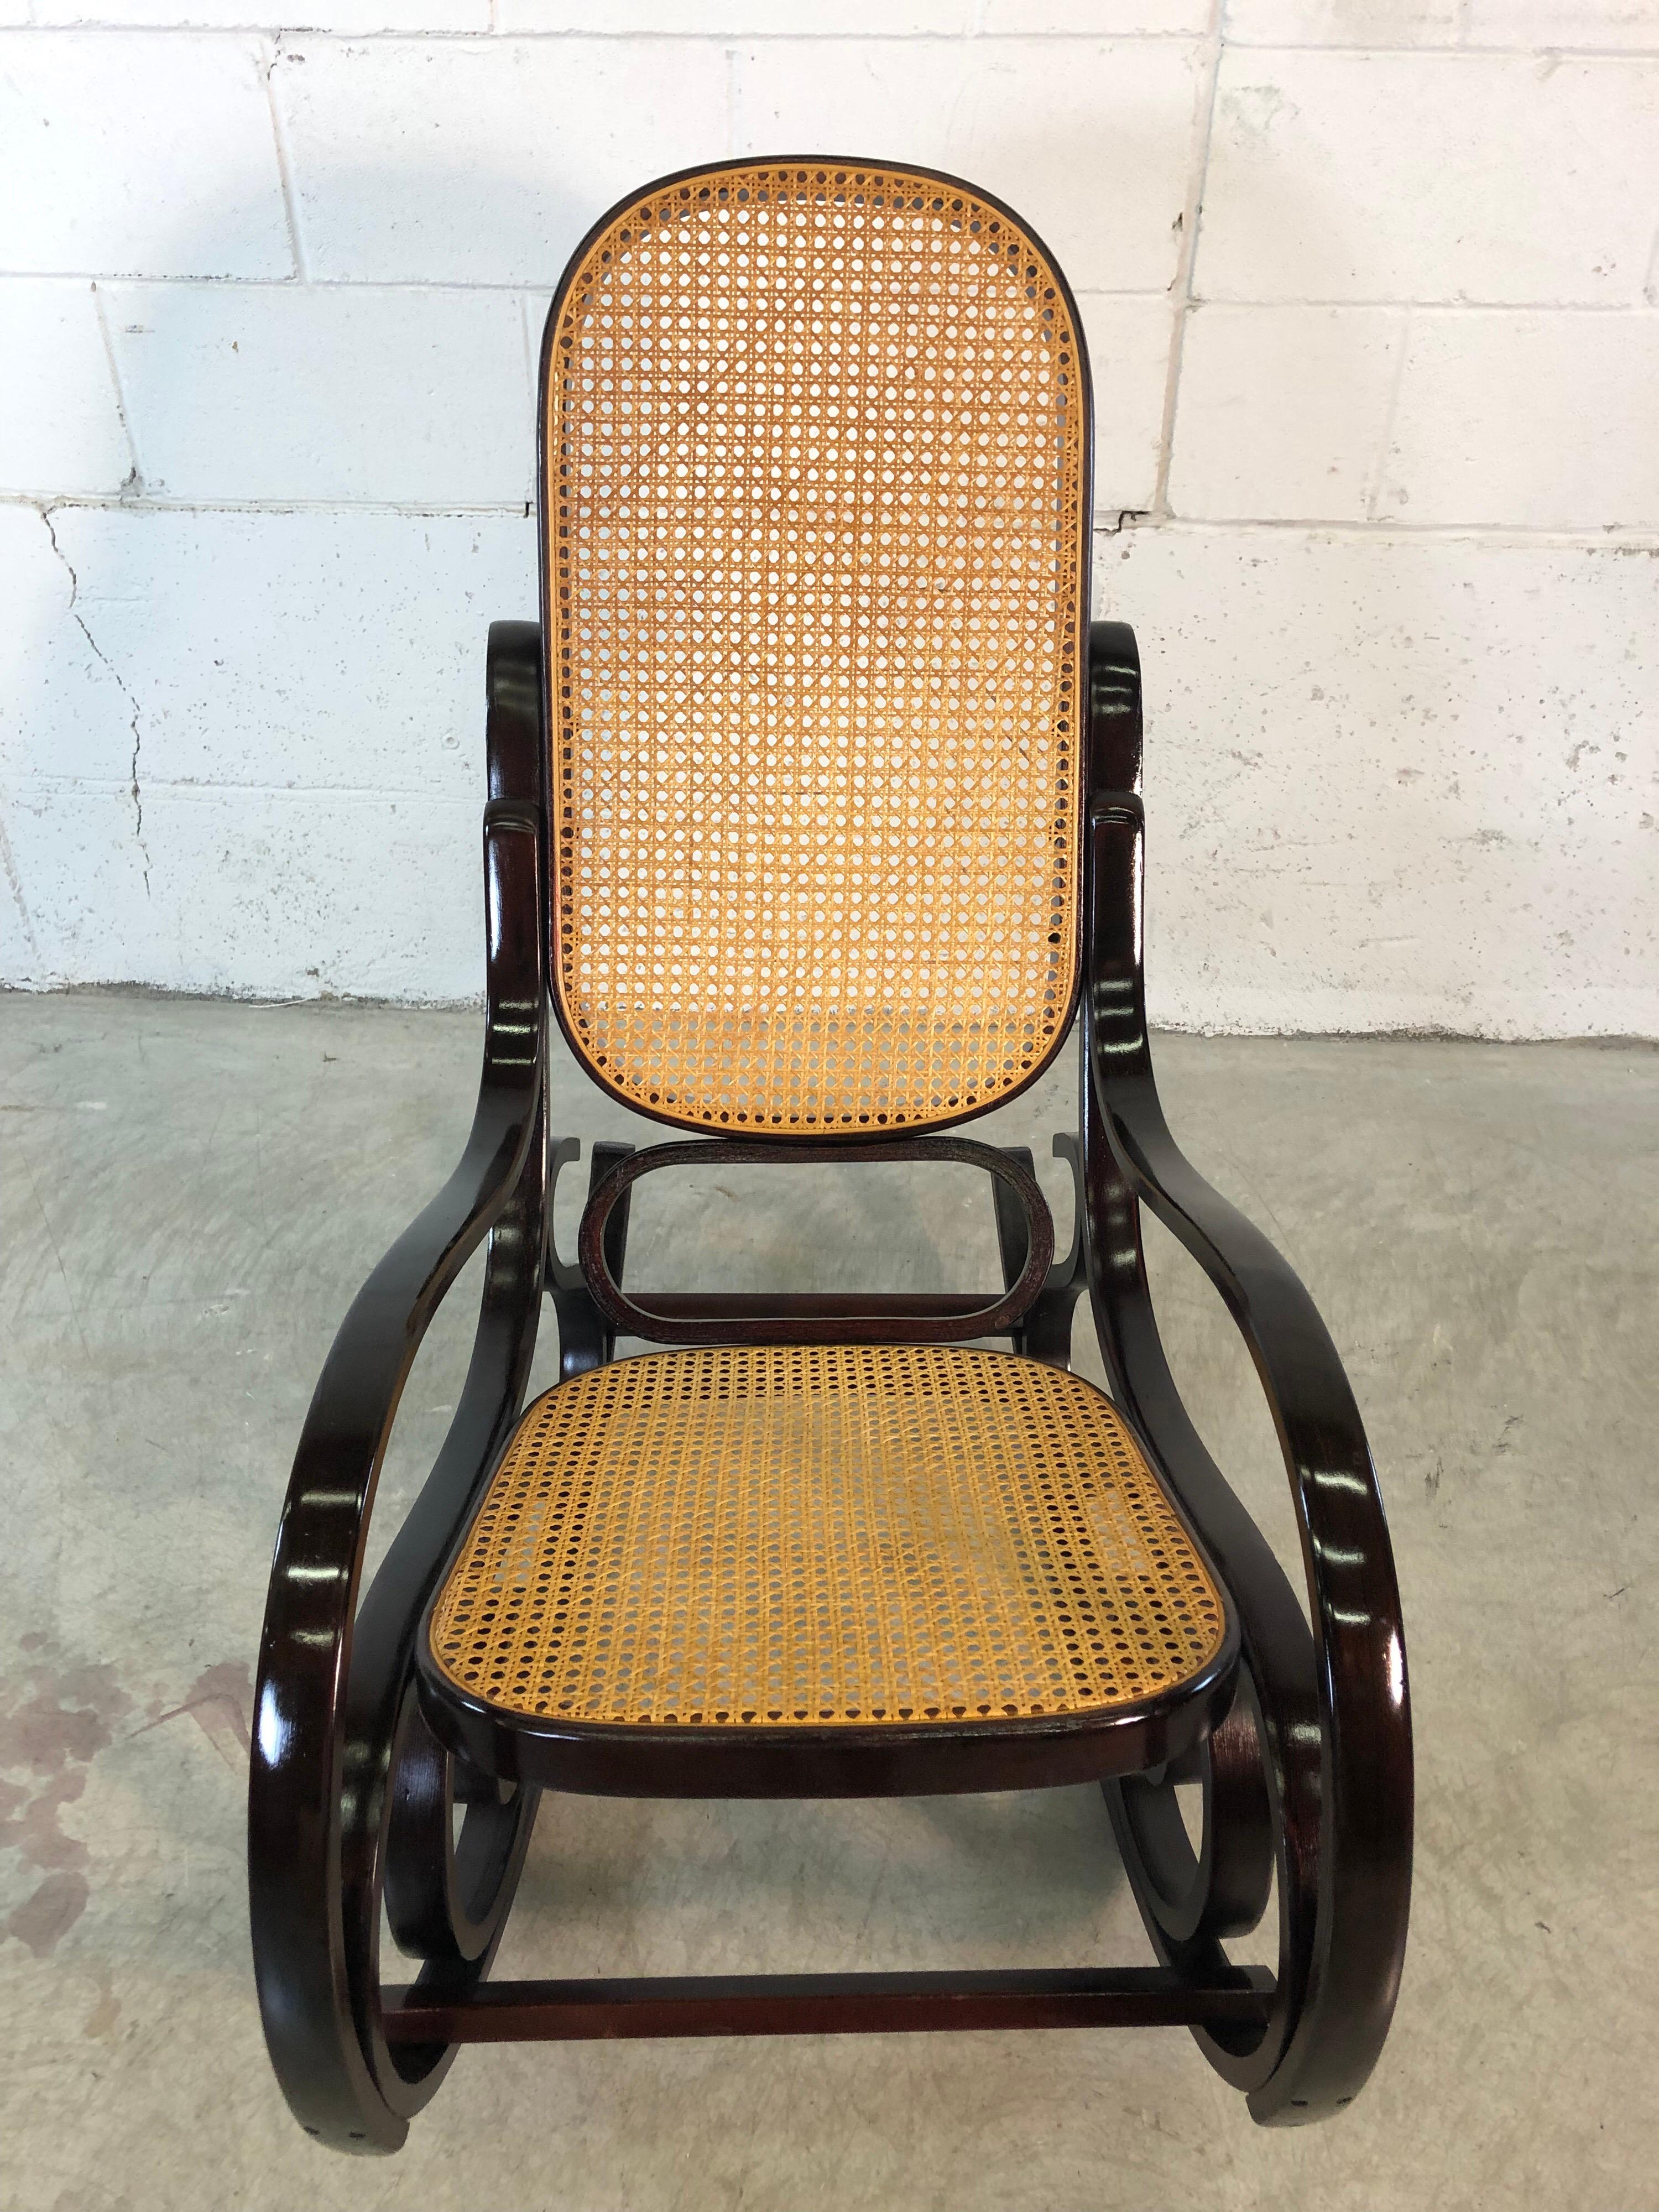 1970s dark brown wood Thonet style rocking chair with caned seat and back. The rocking chair has been completely refinished and restored and is in excellent condition.